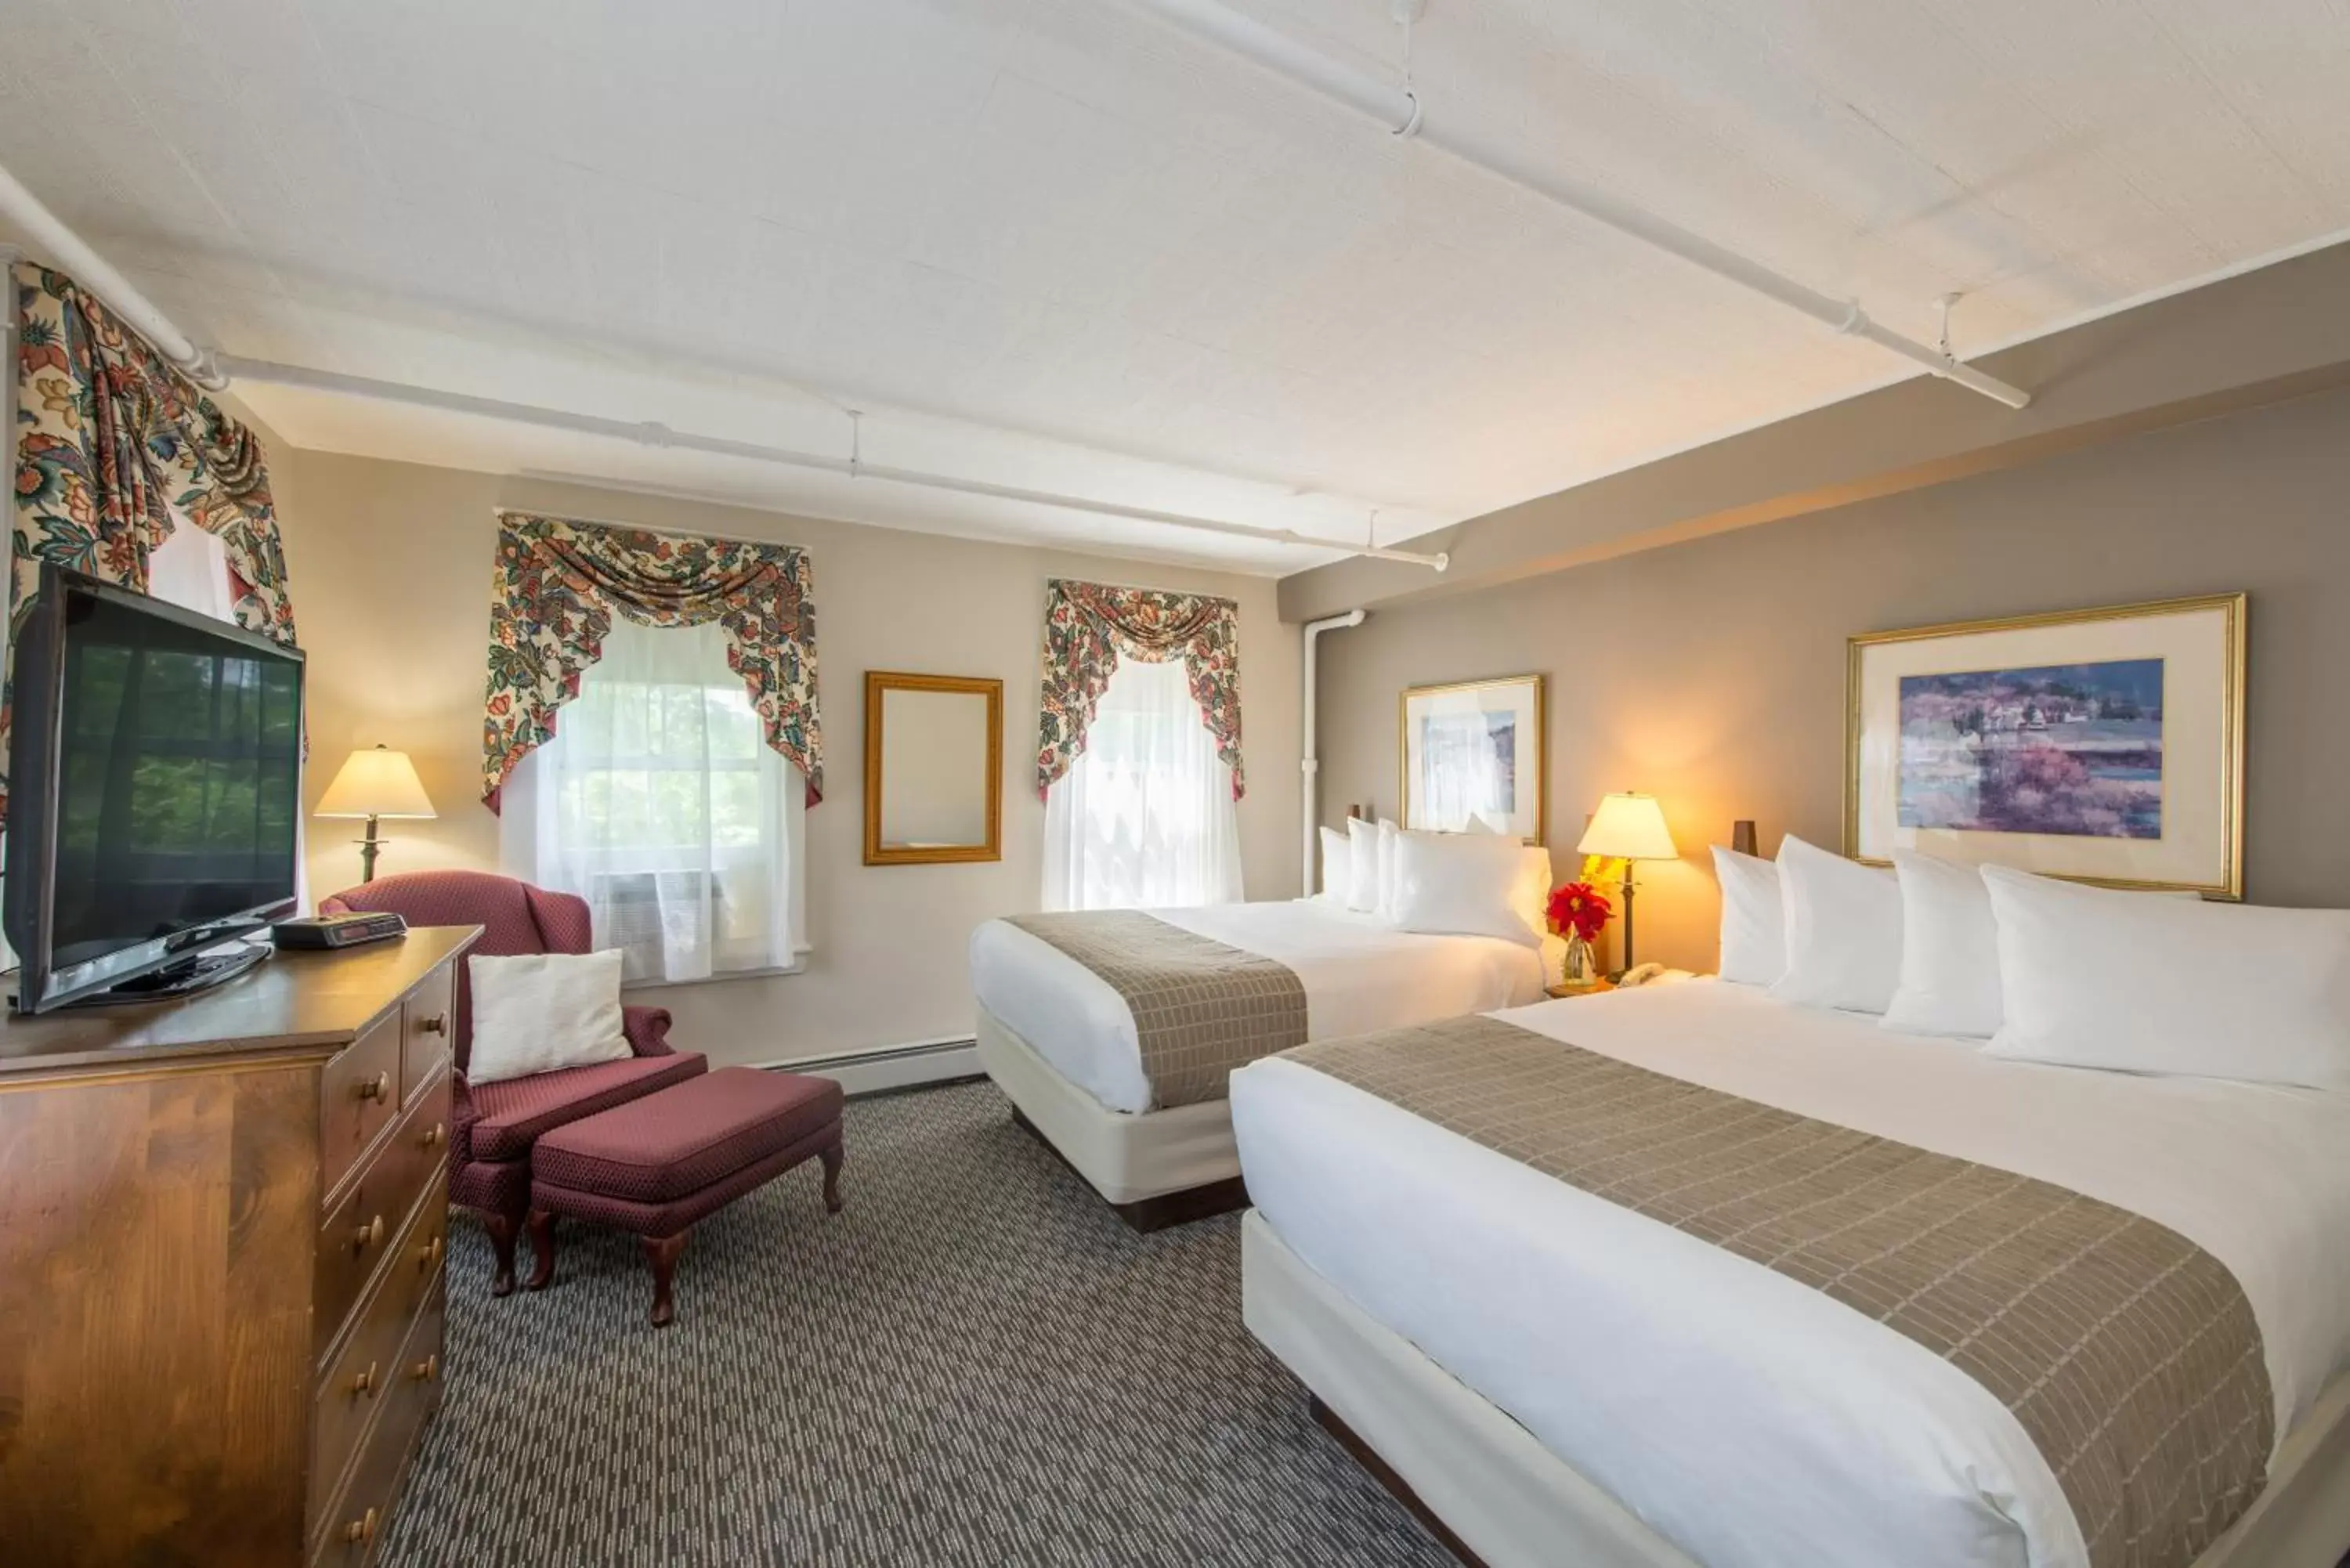 Standard View Room with Two Double Beds in Eagle Mountain House and Golf Club